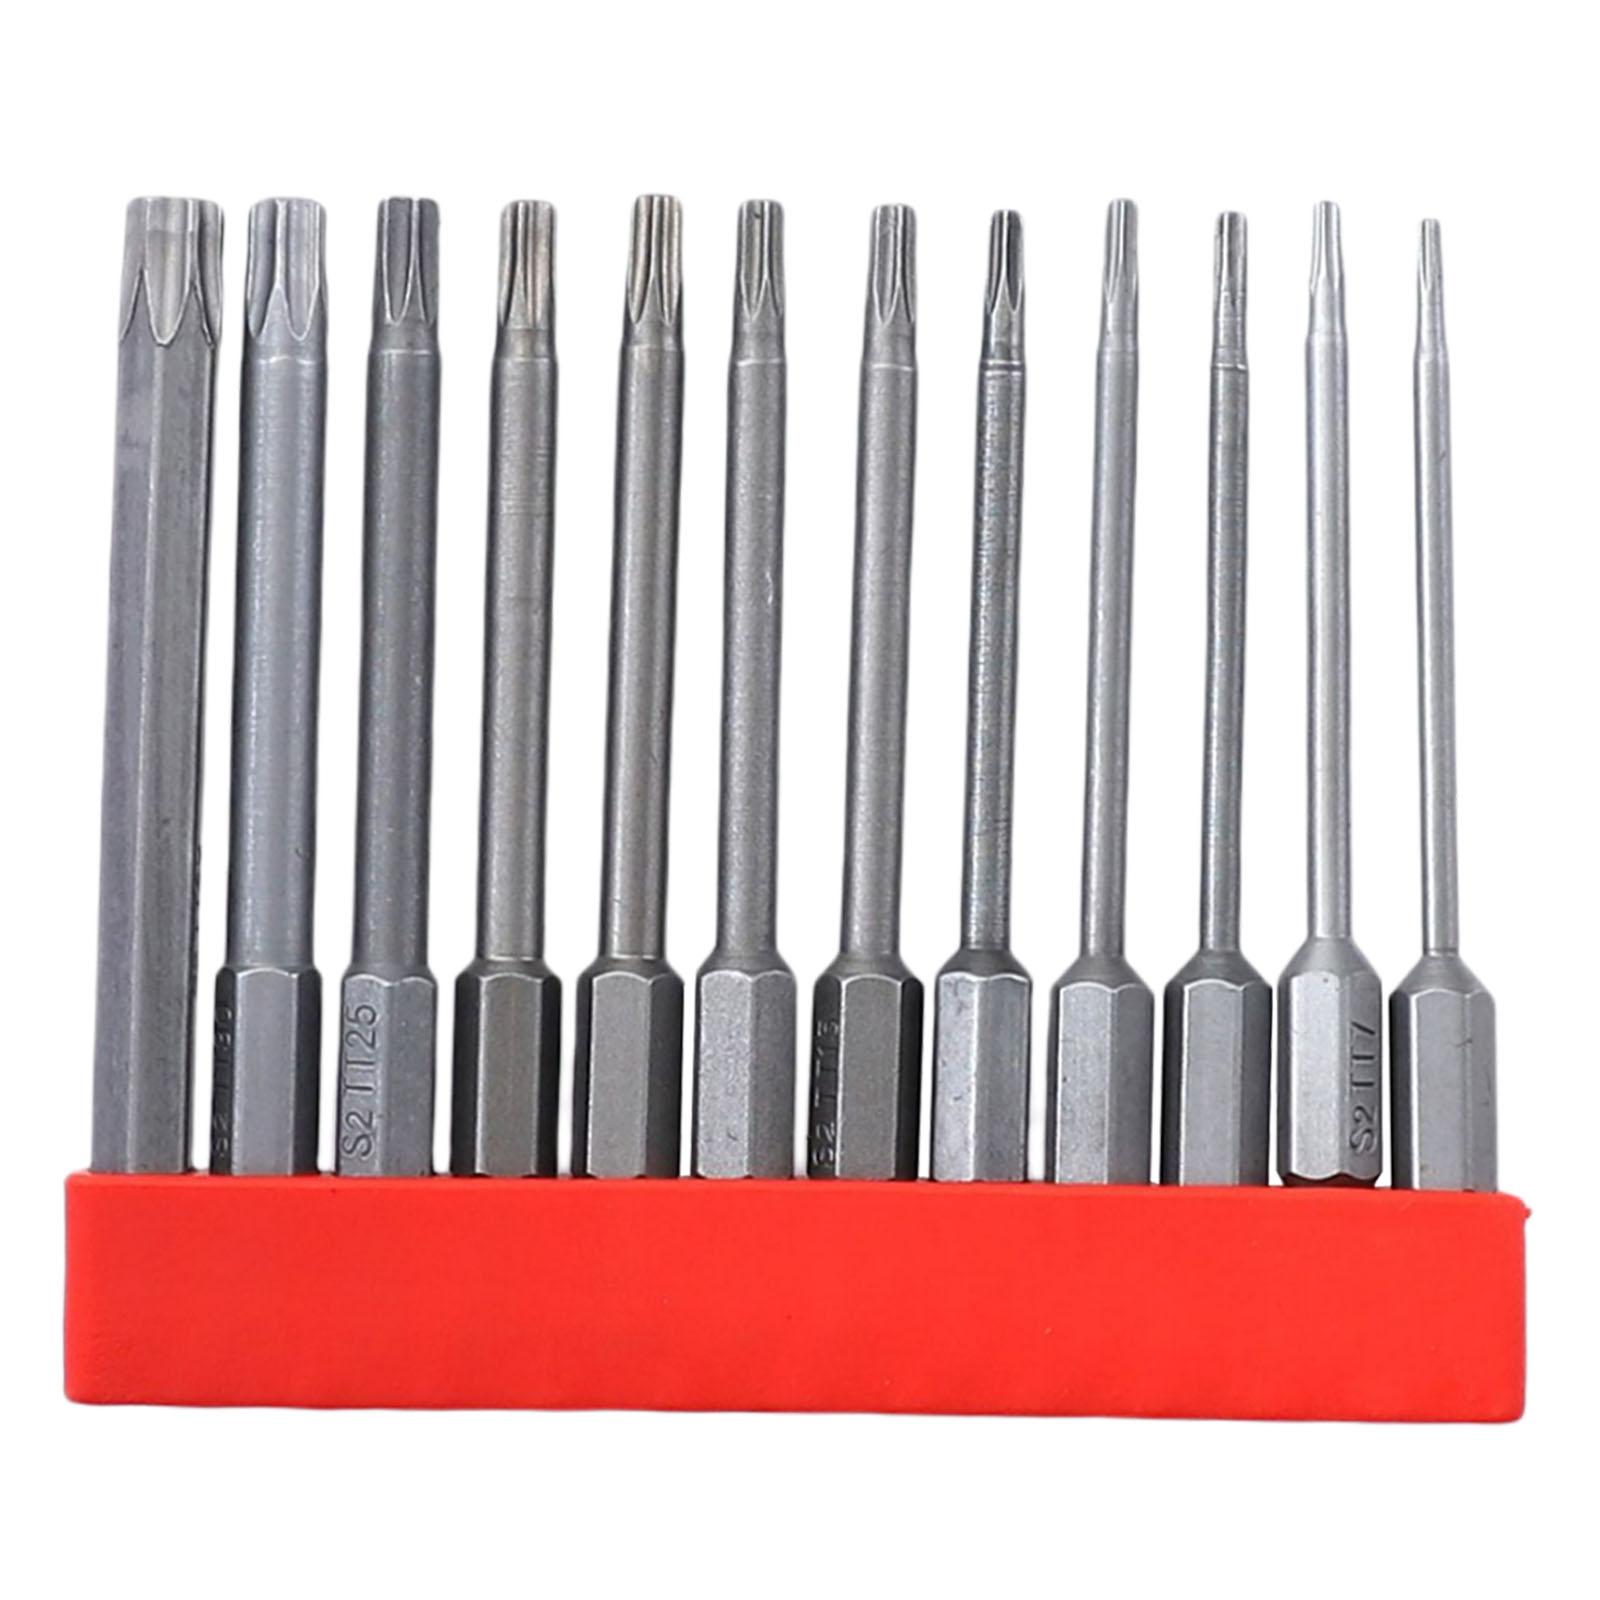 12 Pieces Hollow Rings Wrench Bit Set S2 Alloy Steel Metric for Metalworking 75mm